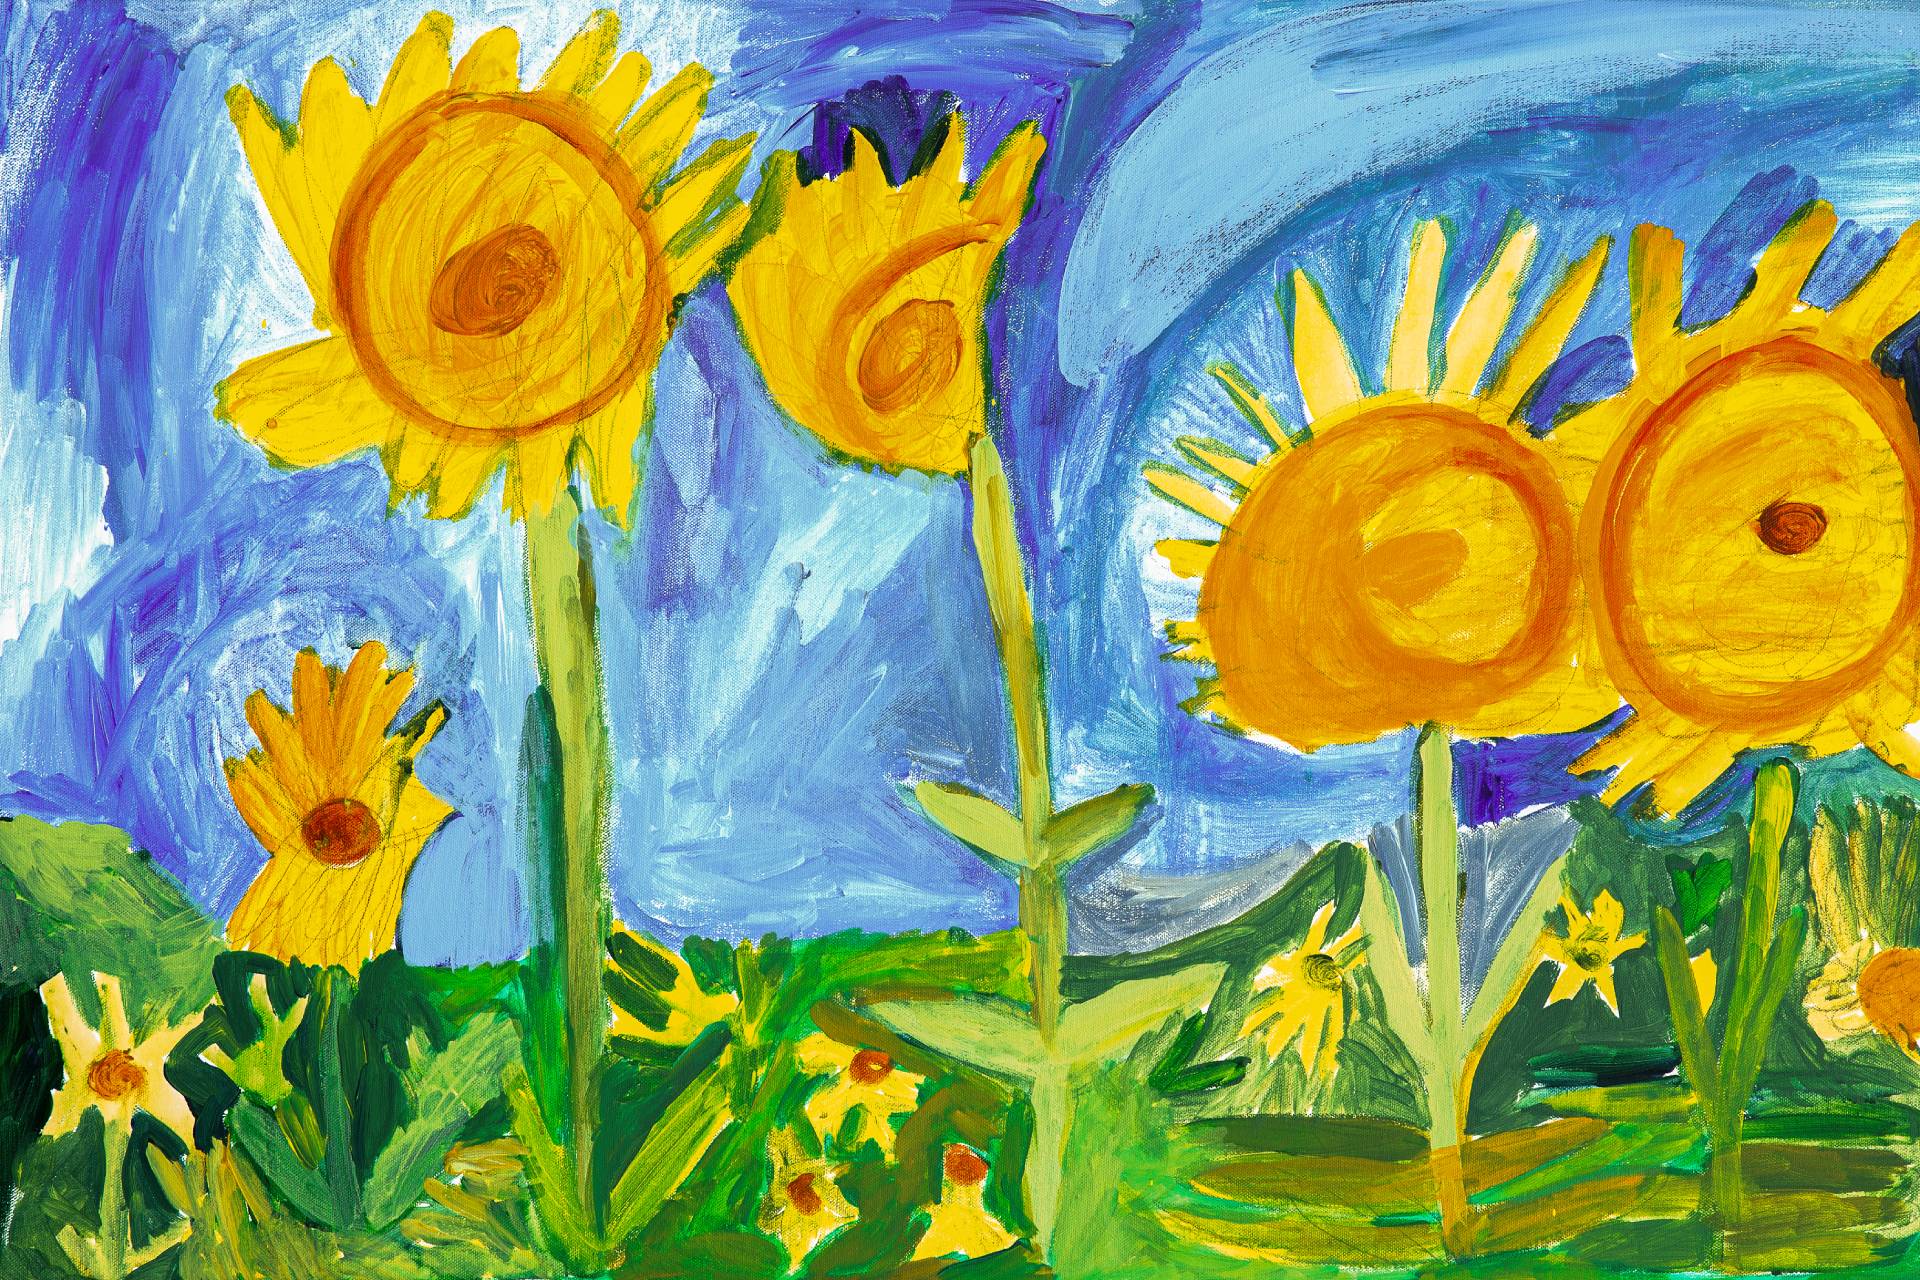 A painting of yellow sunflowers with green stalks, set on a background of blue sky and green grass.